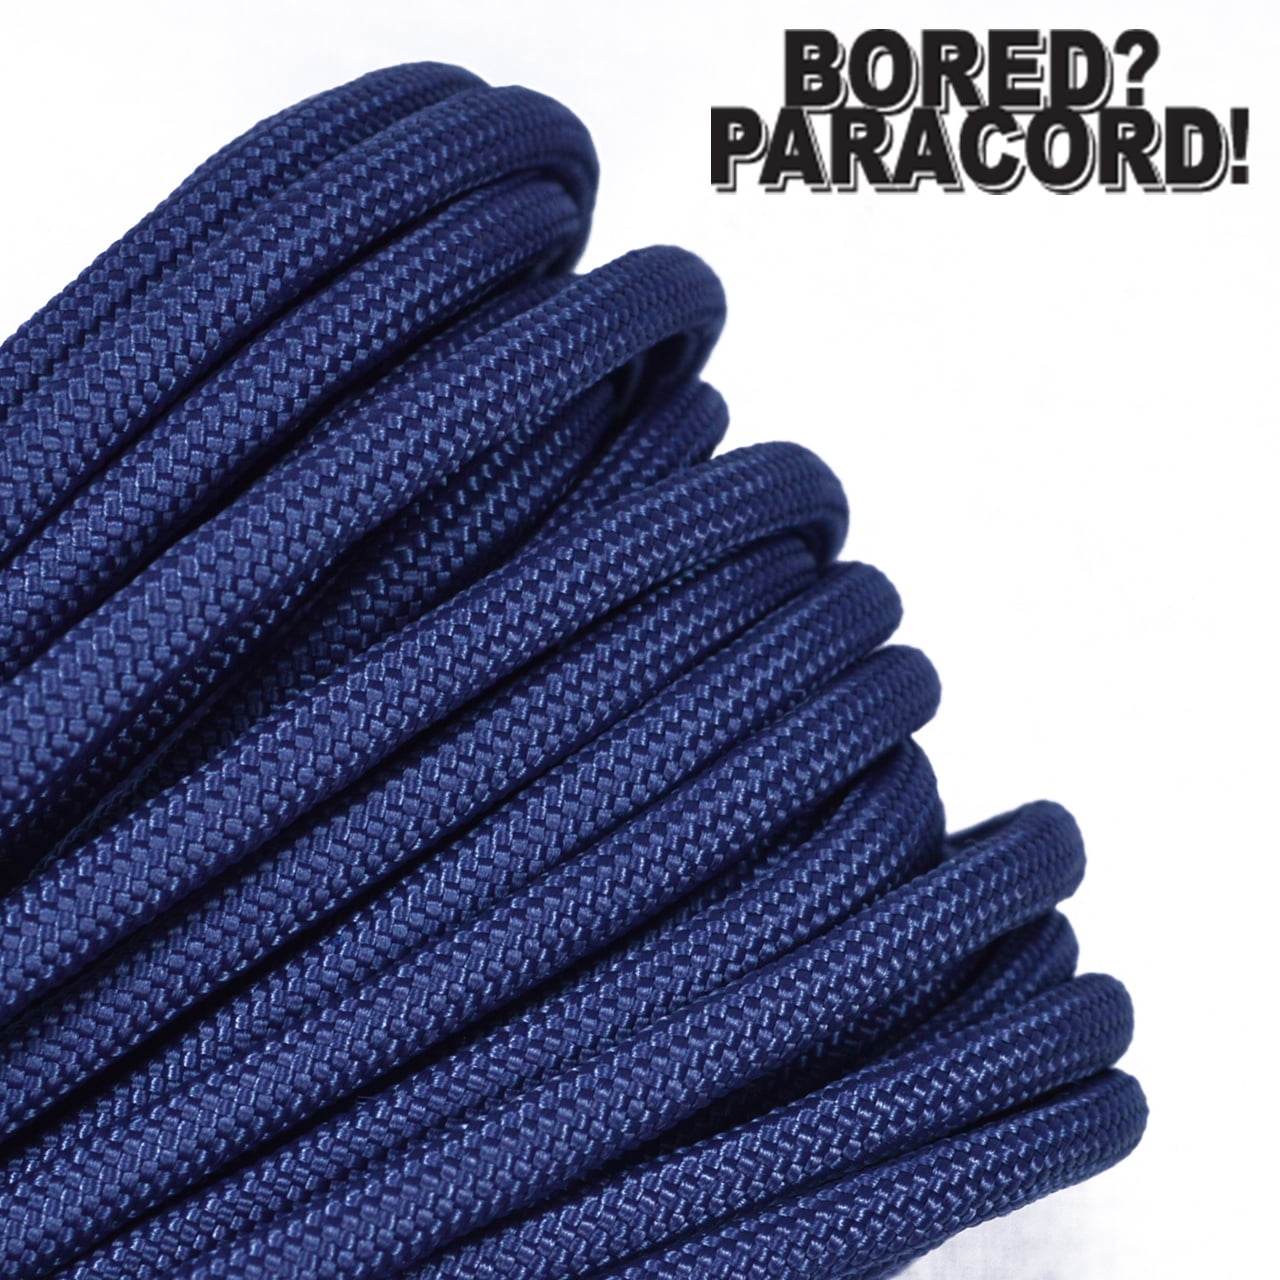 10 Bored Paracord 1000 Spools of Parachute 550 Cord Type III 7 Strand Paracord 25 50 100 Hanks & 250 Over 300 Colors 1 